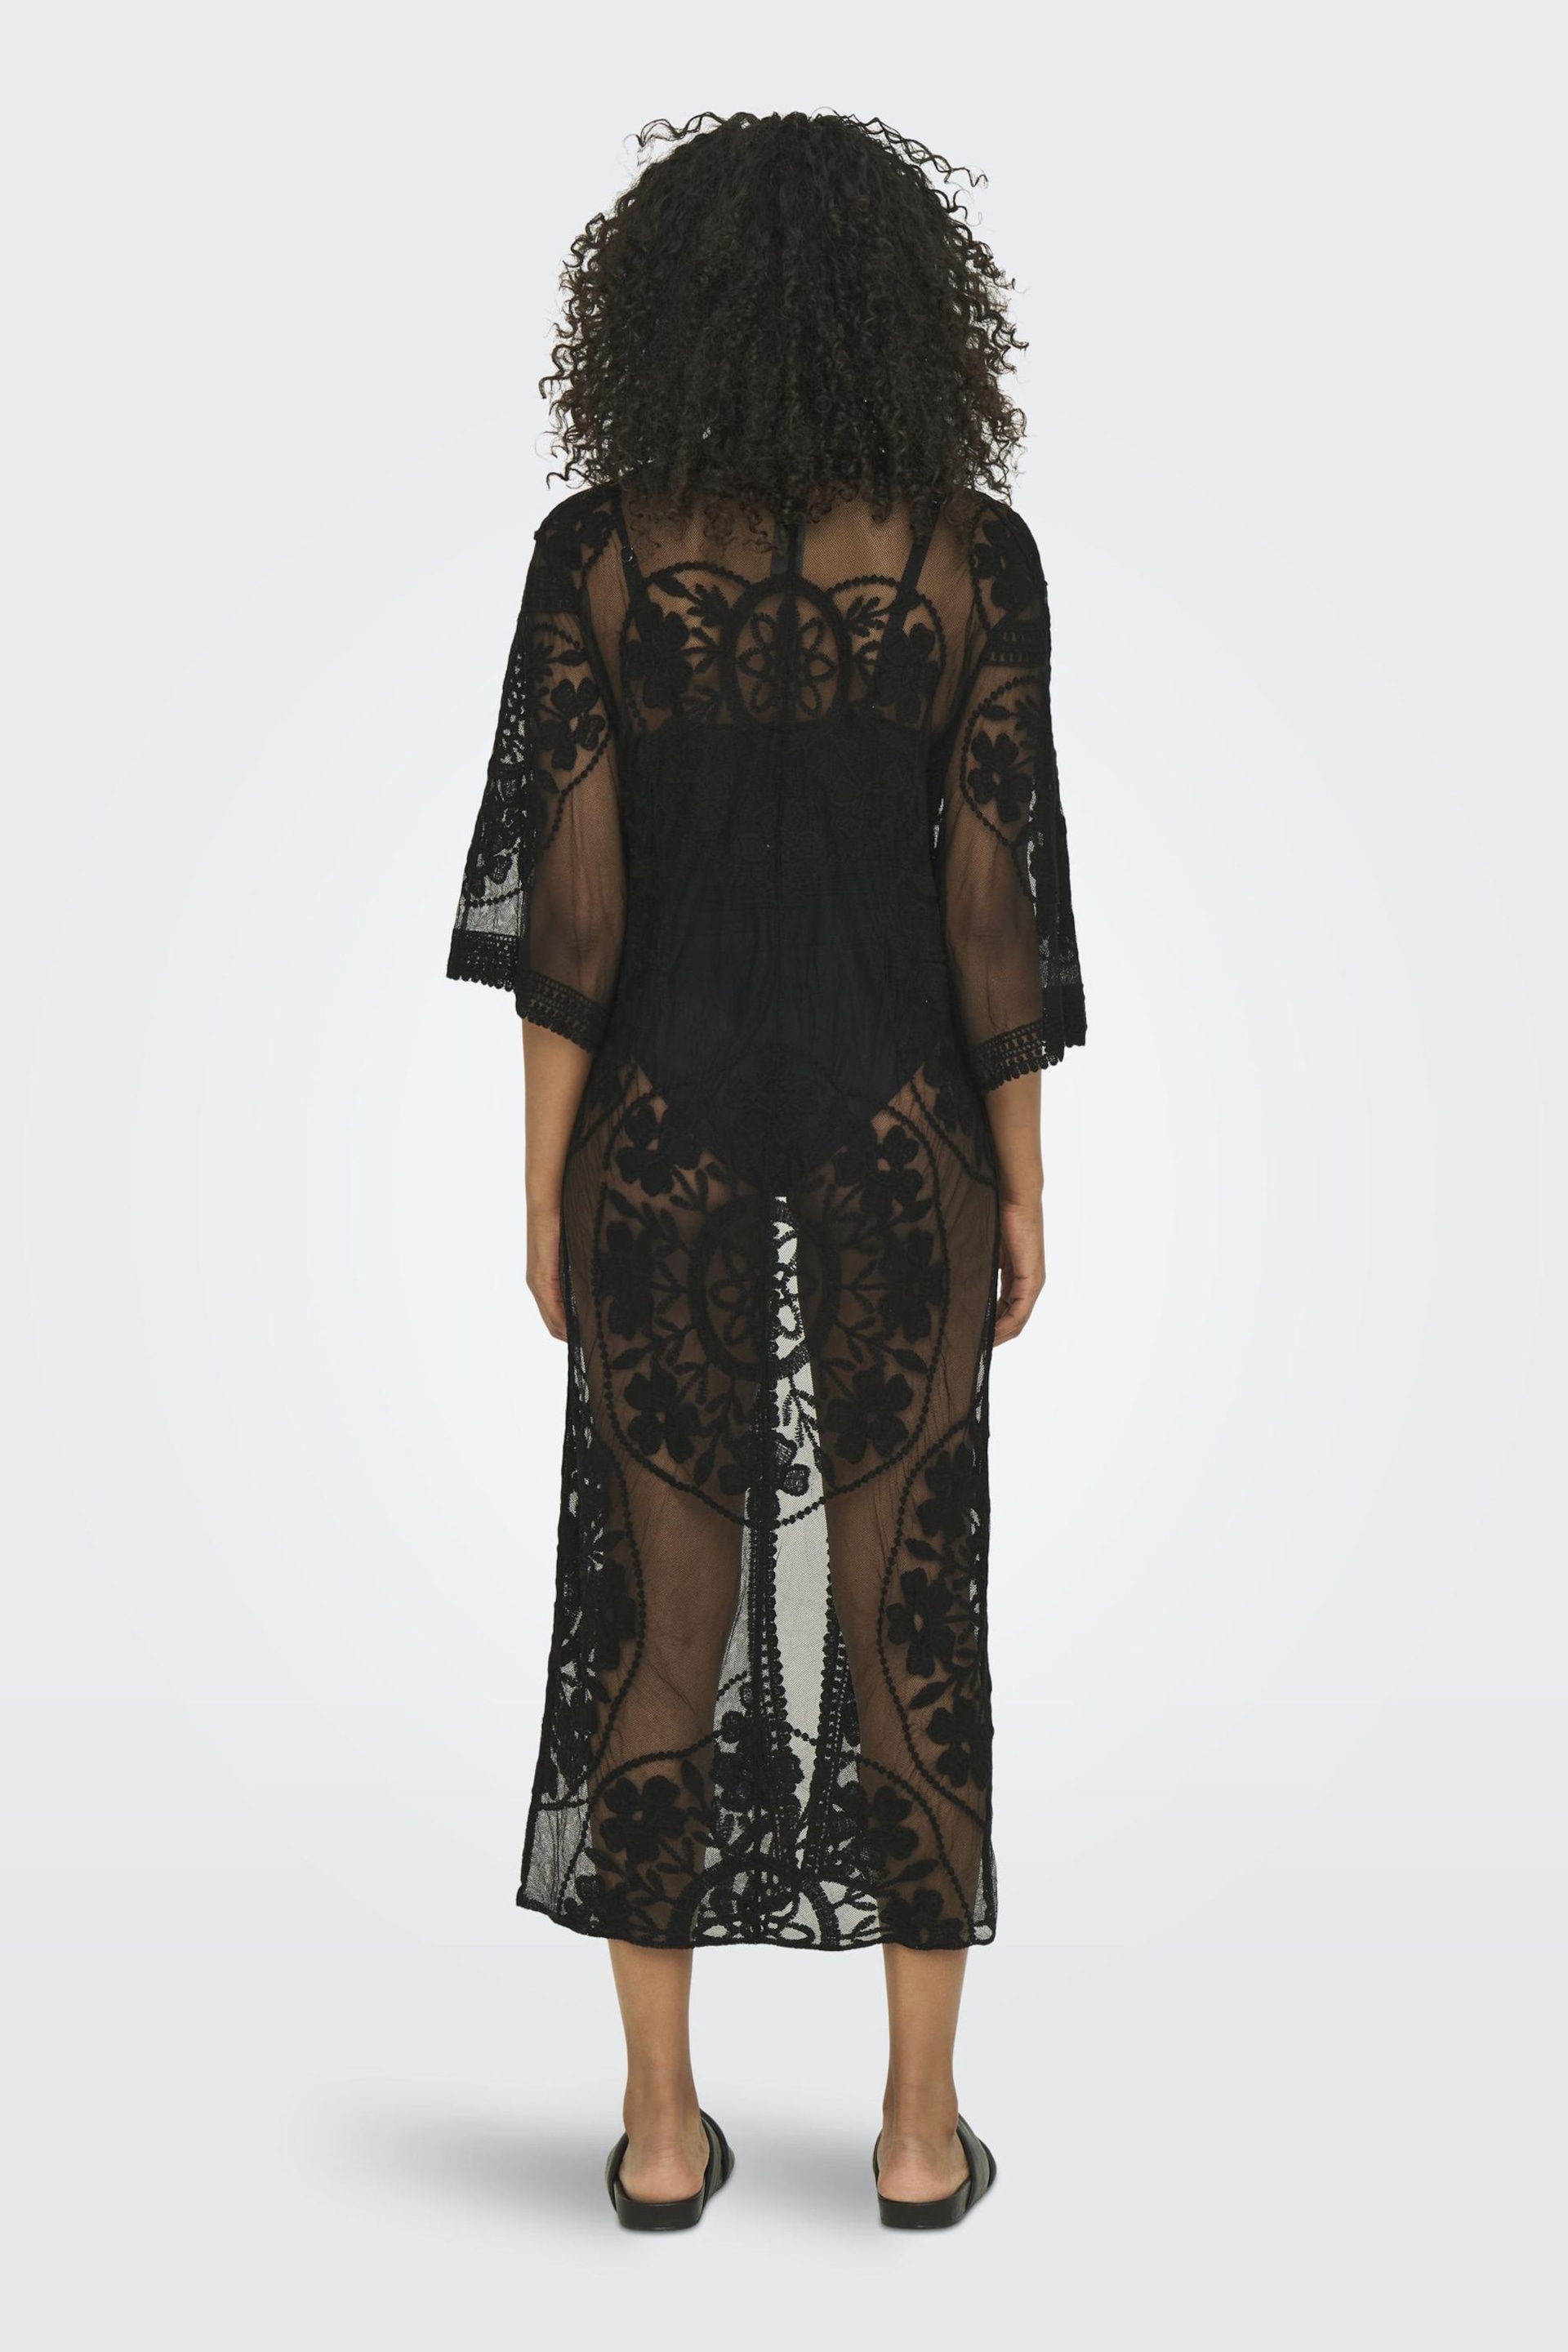 ONLY Black Embroidered Maxi Beach Cover-Up Kaftan - Image 2 of 7